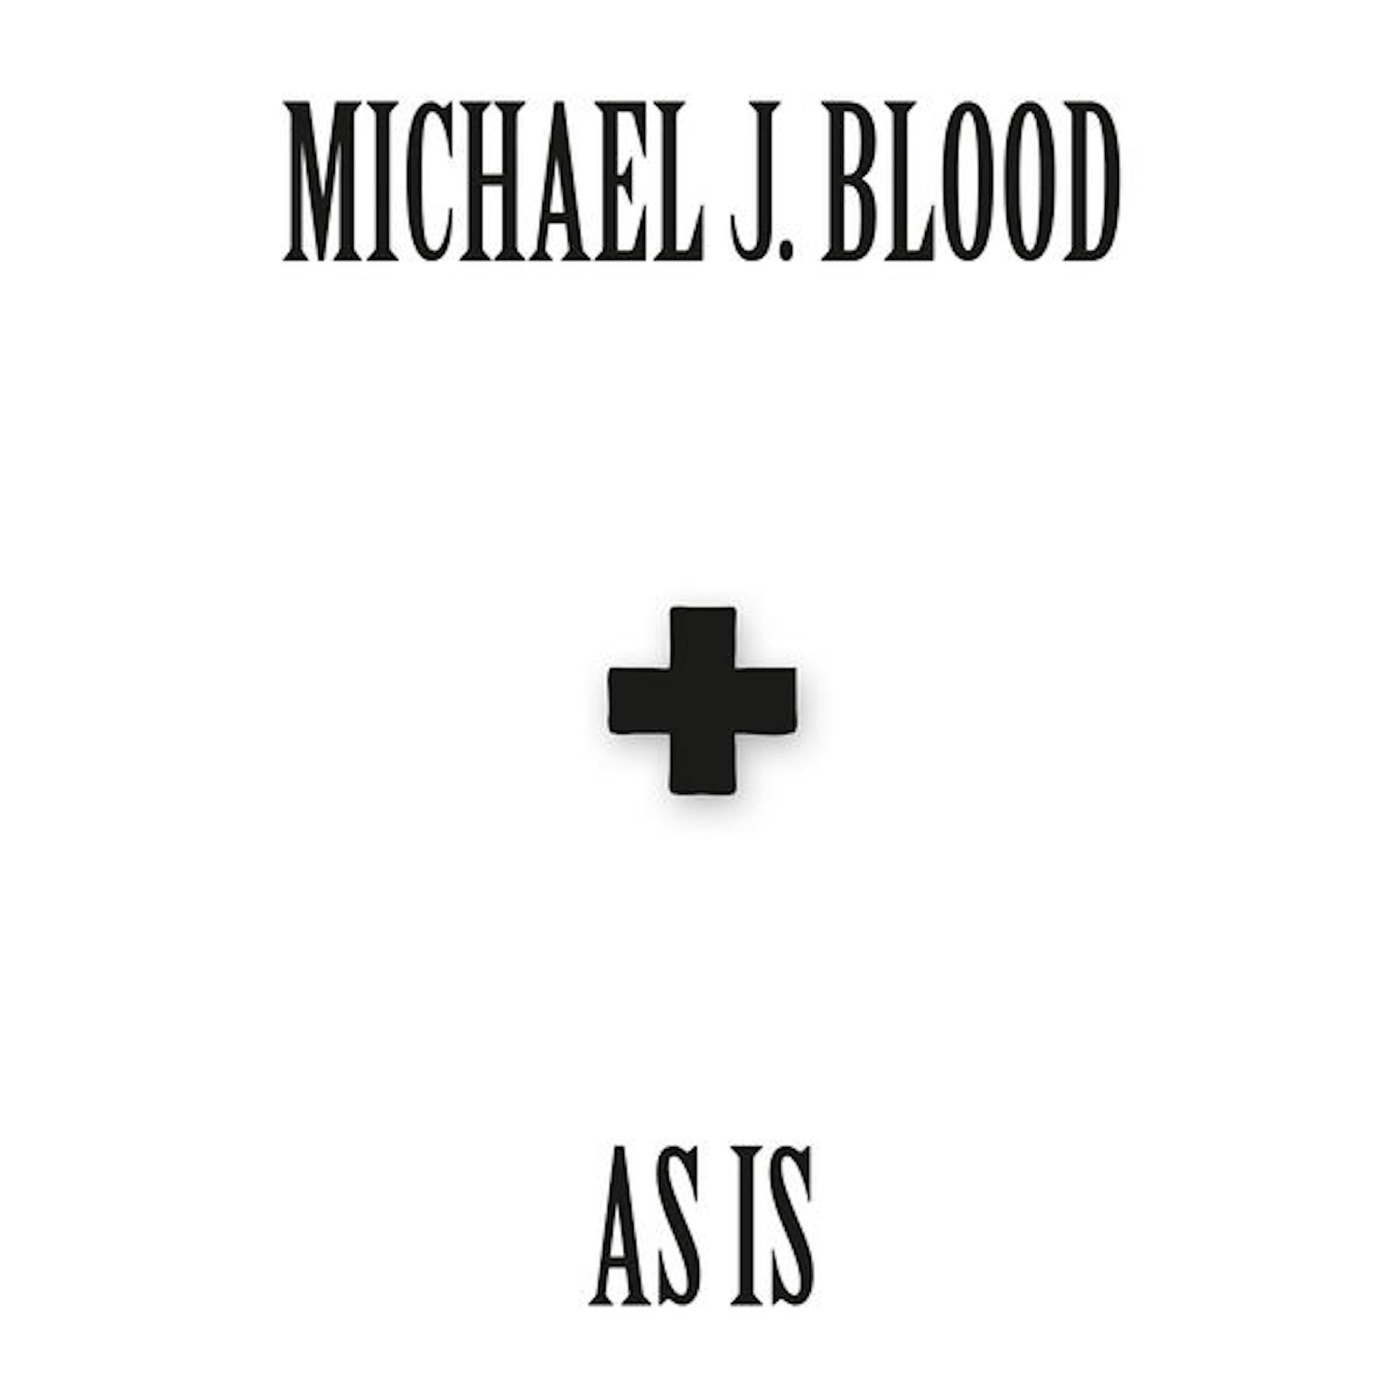 As Is by Michael J. Blood